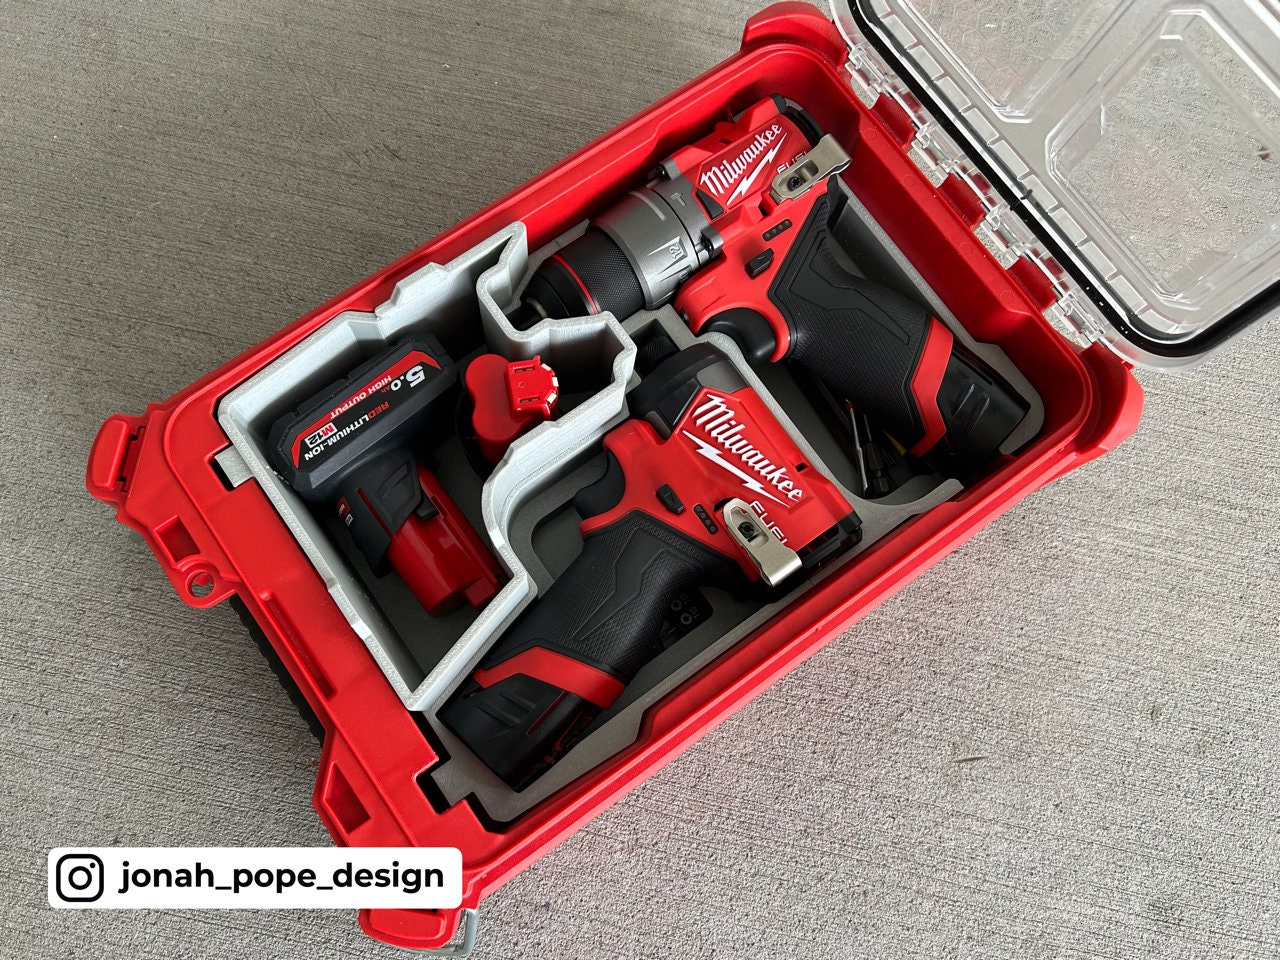 Milwaukee M12 Gen 3 Drill and Impact Stackout3d Jonah Pope